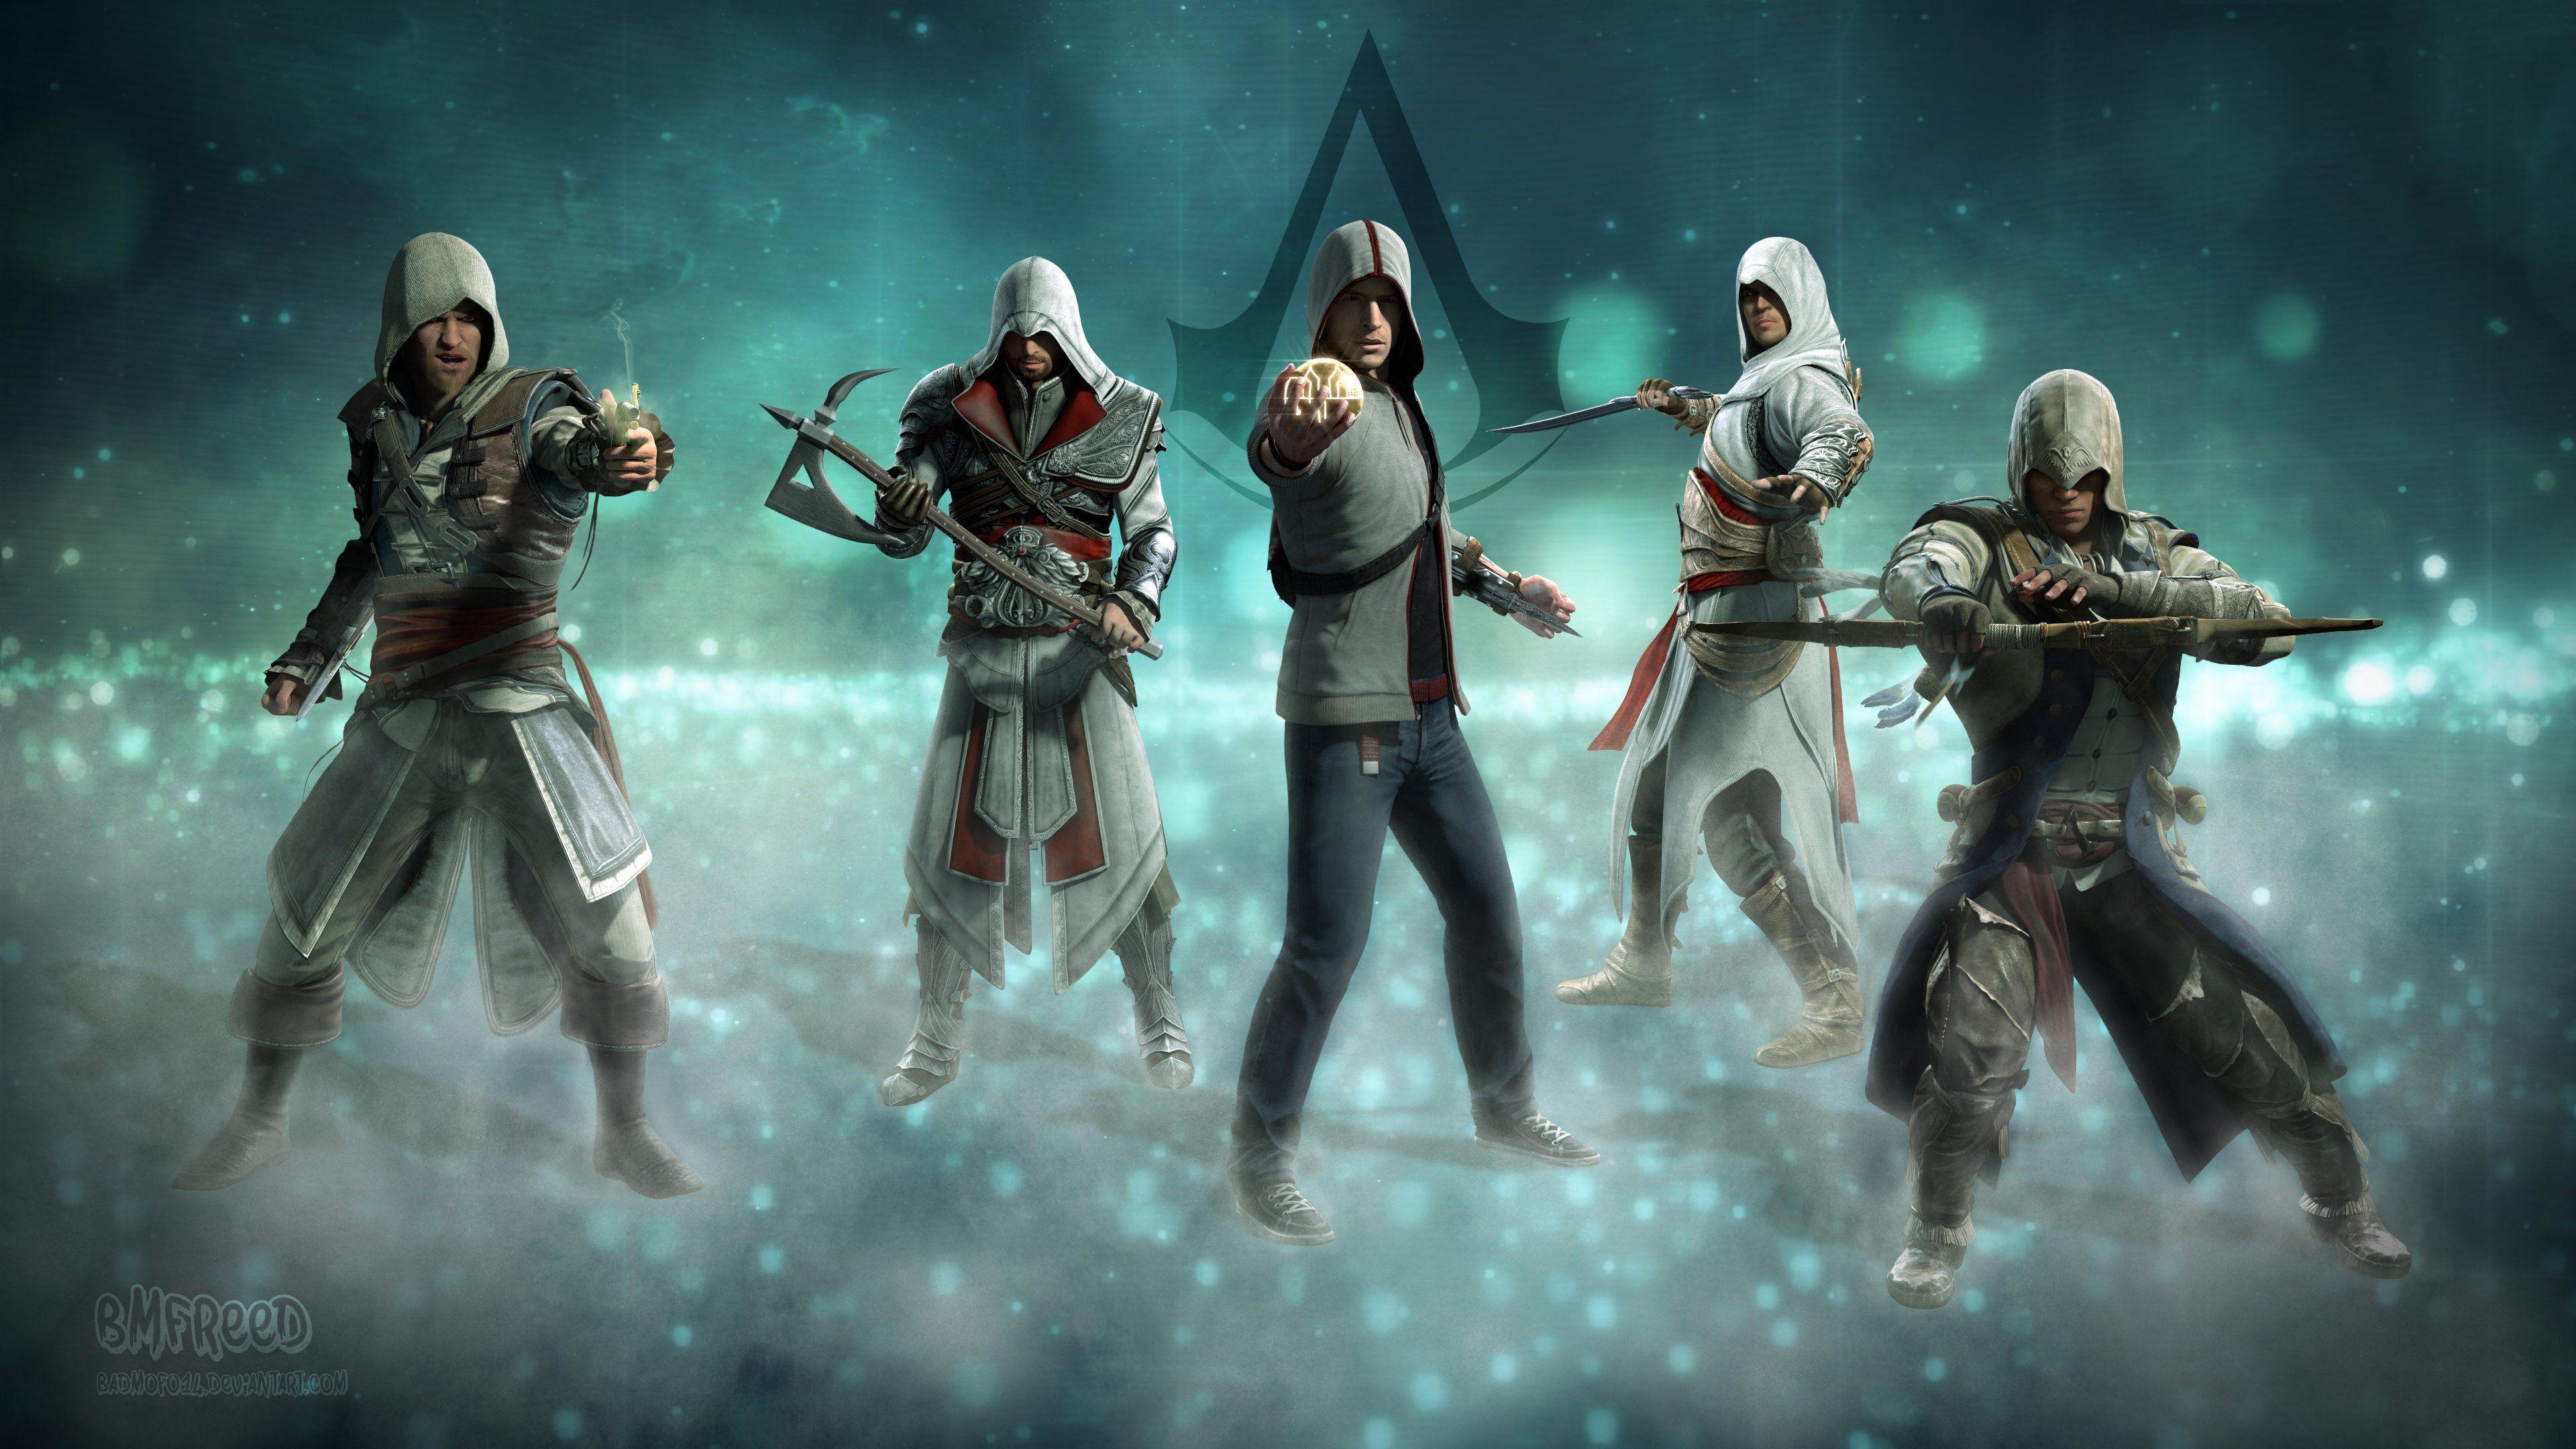 Assassin's Creed Unity Wallpaper Collection For Free Download